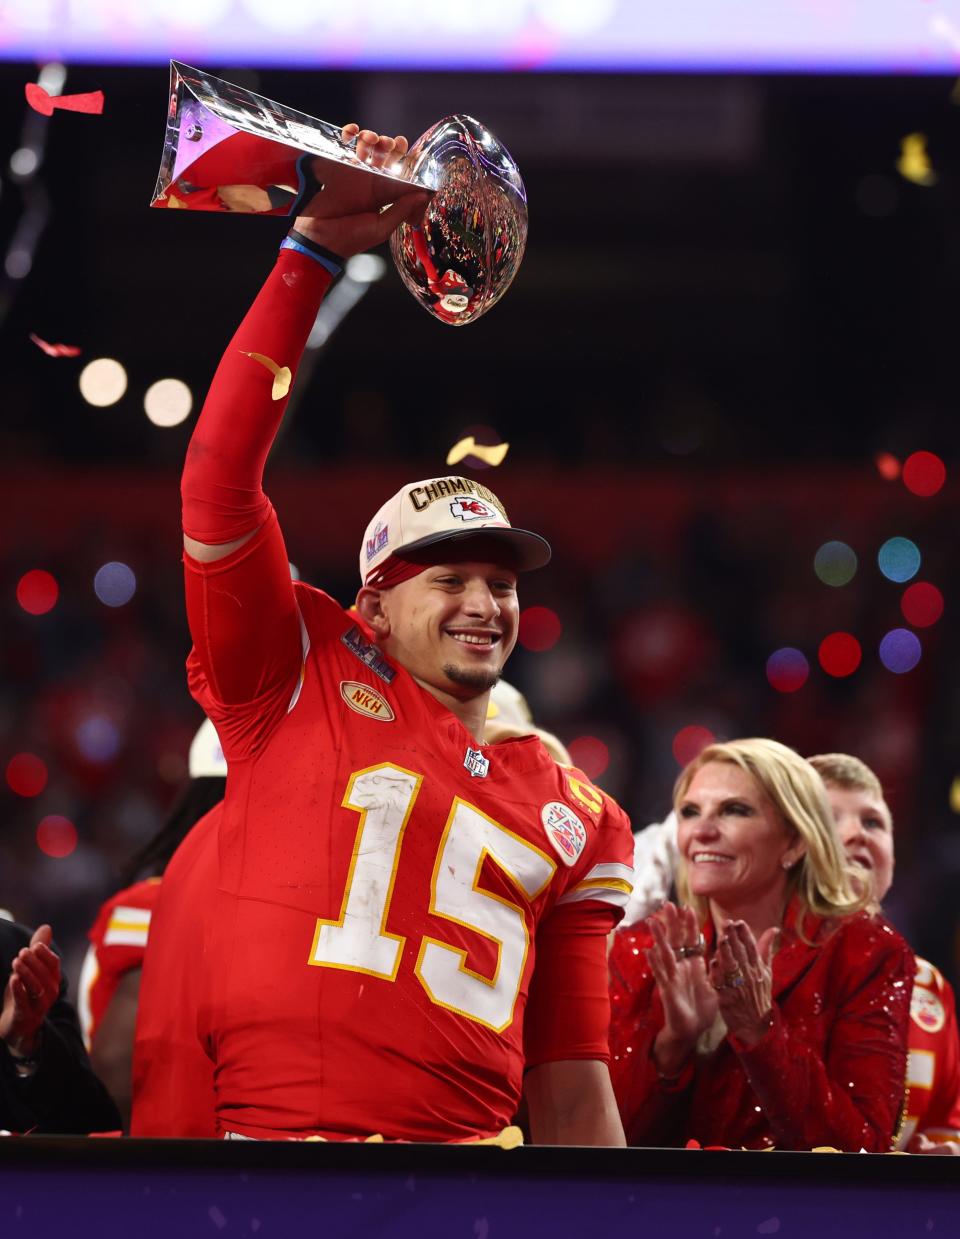 Kansas City Chiefs quarterback Patrick Mahomes hoists the Vince Lombardi Trophy after defeating the San Francisco 49ers in Super Bowl LVIII. Some 49ers fans reacted to the overtime win by smashing their TVs in videos shared on social media.